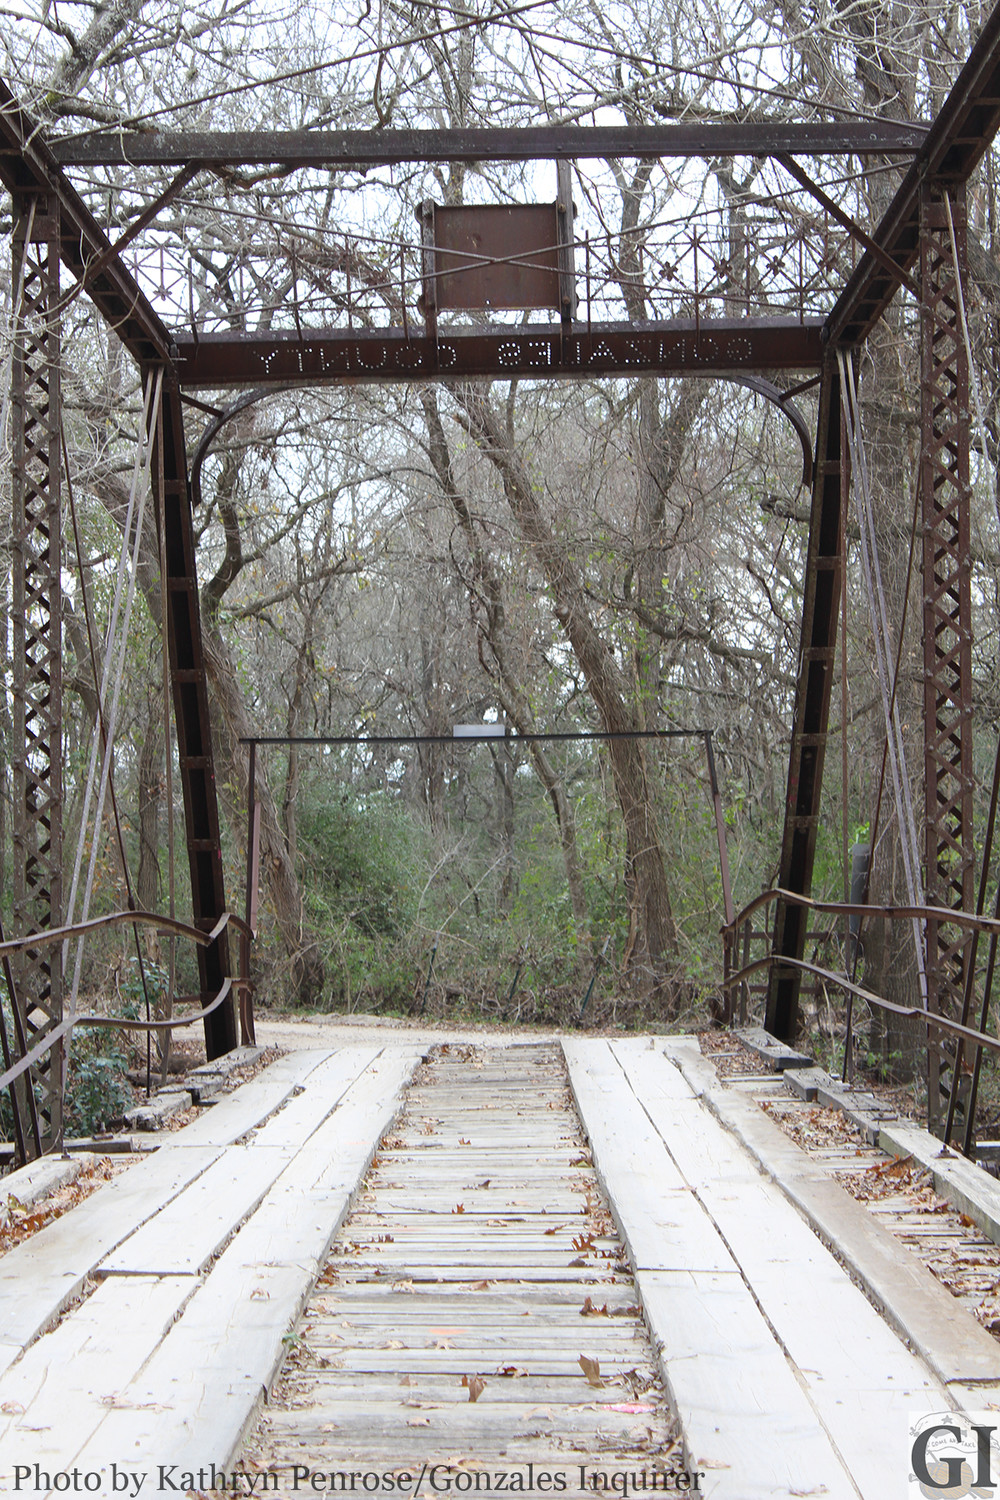 County commissioners wanted to make sure history was preserved and after hearing a plan on Monday, they were reassured that the Peach Creek Bridge will indeed be handled with care during repairs, instead of an all-out replacement.